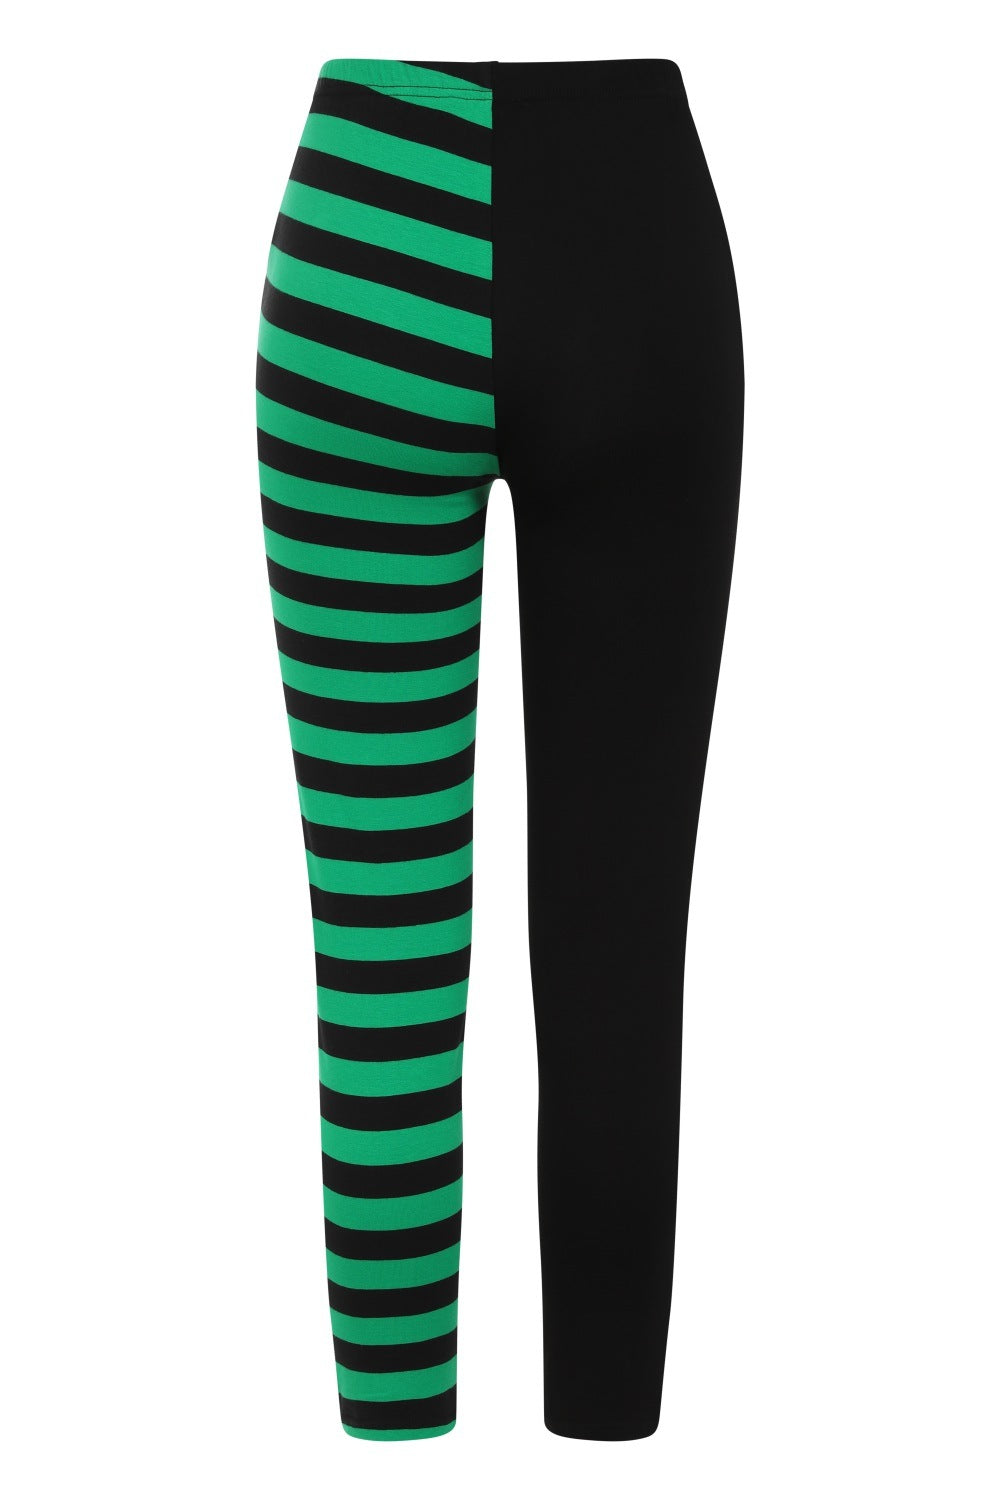 High waisted leggings with one striped green leg and zip waist